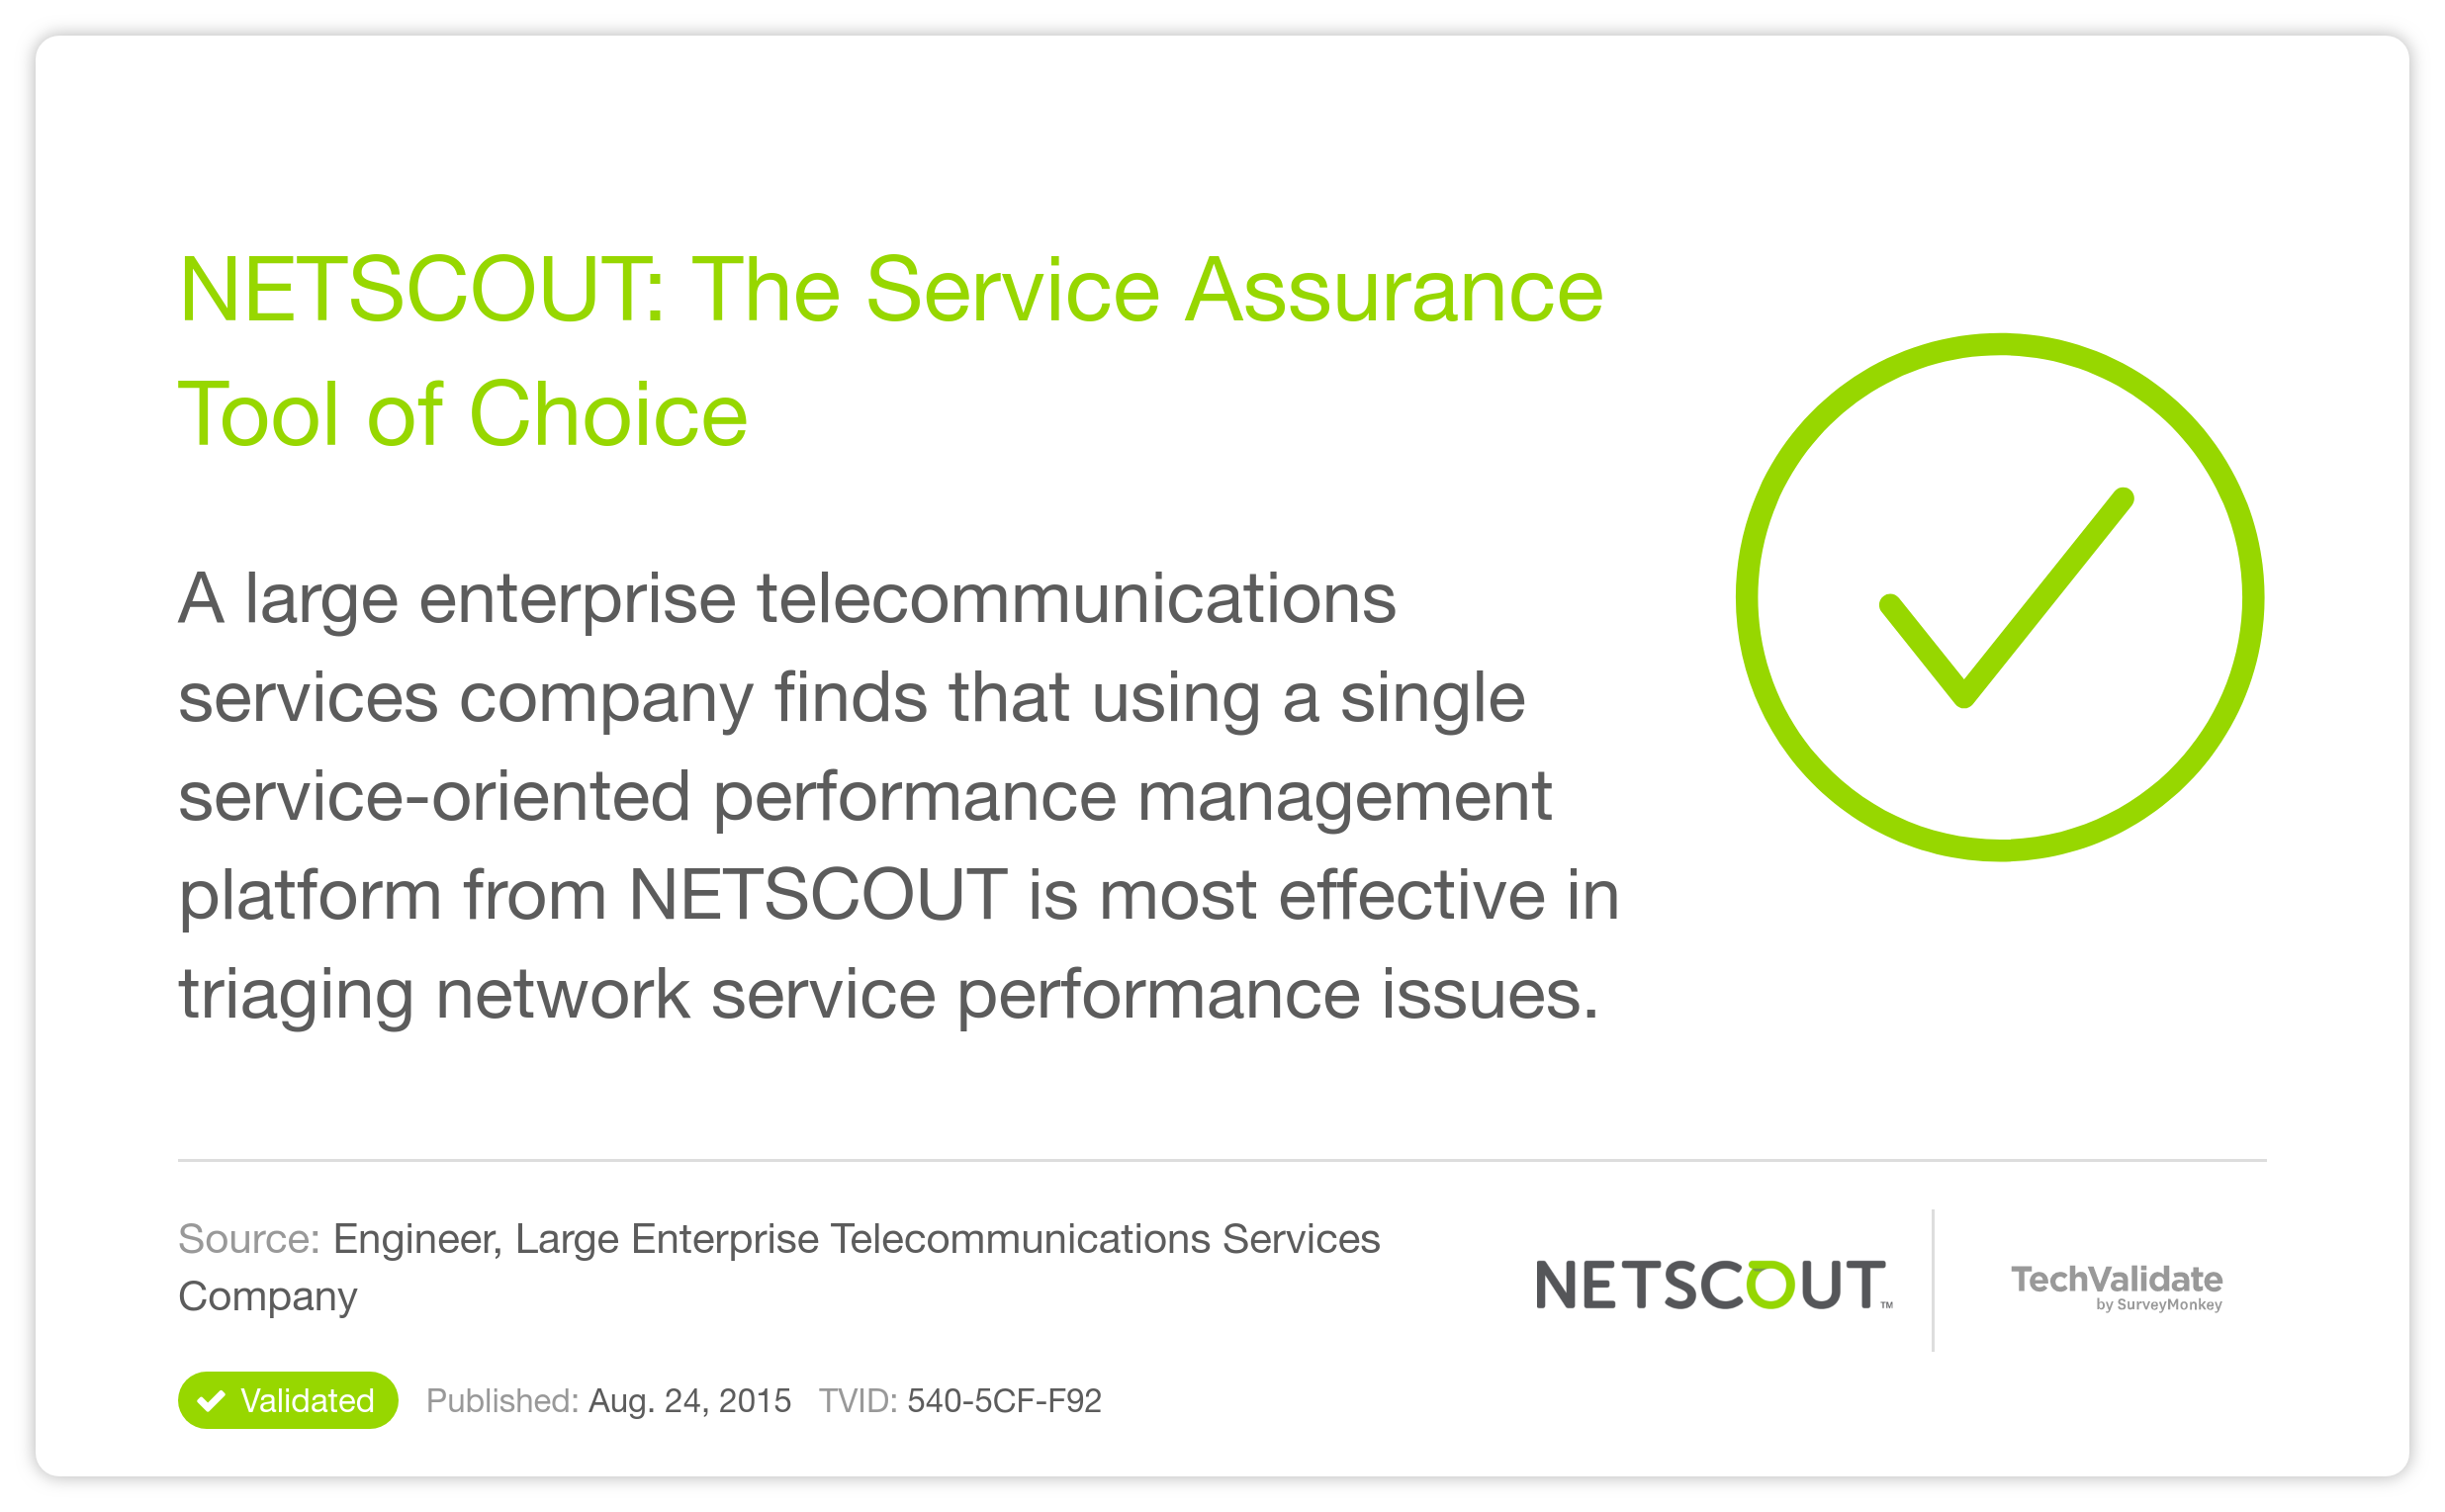 NETSCOUT: The Service Assurance Tool of Choice